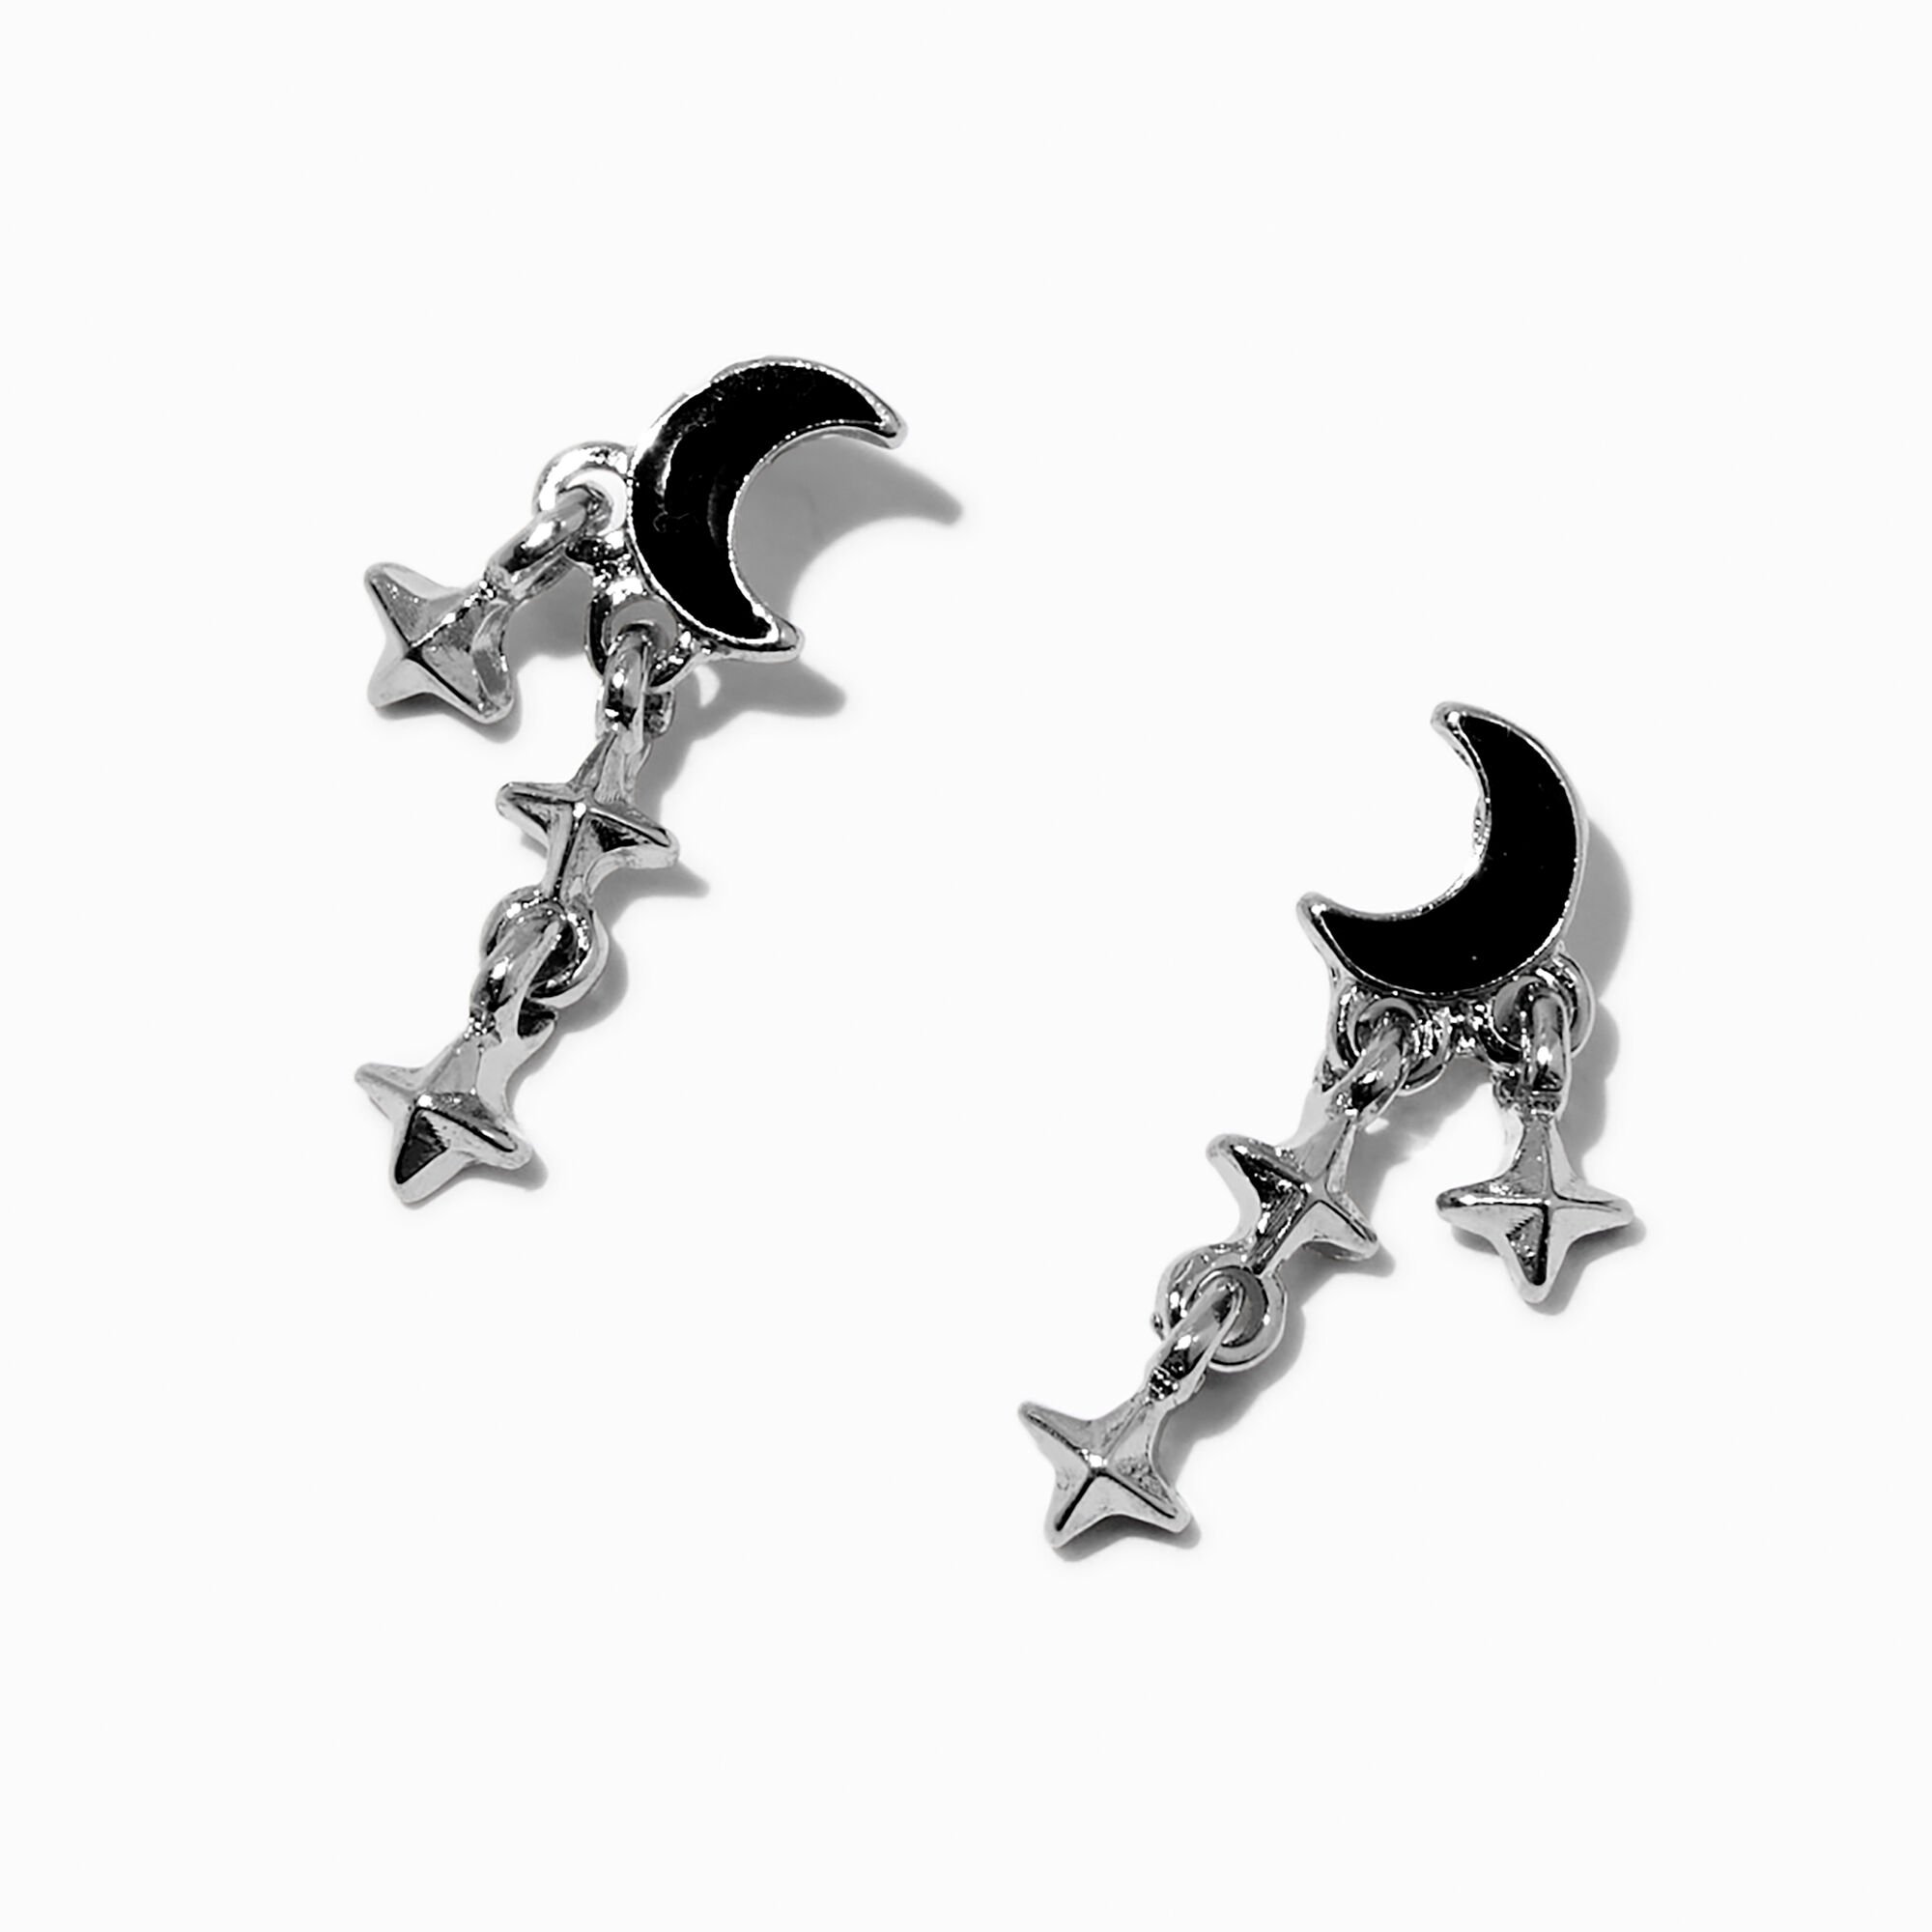 View Claires Crescent Moon Stars SilverTone Drop Earrings Black information